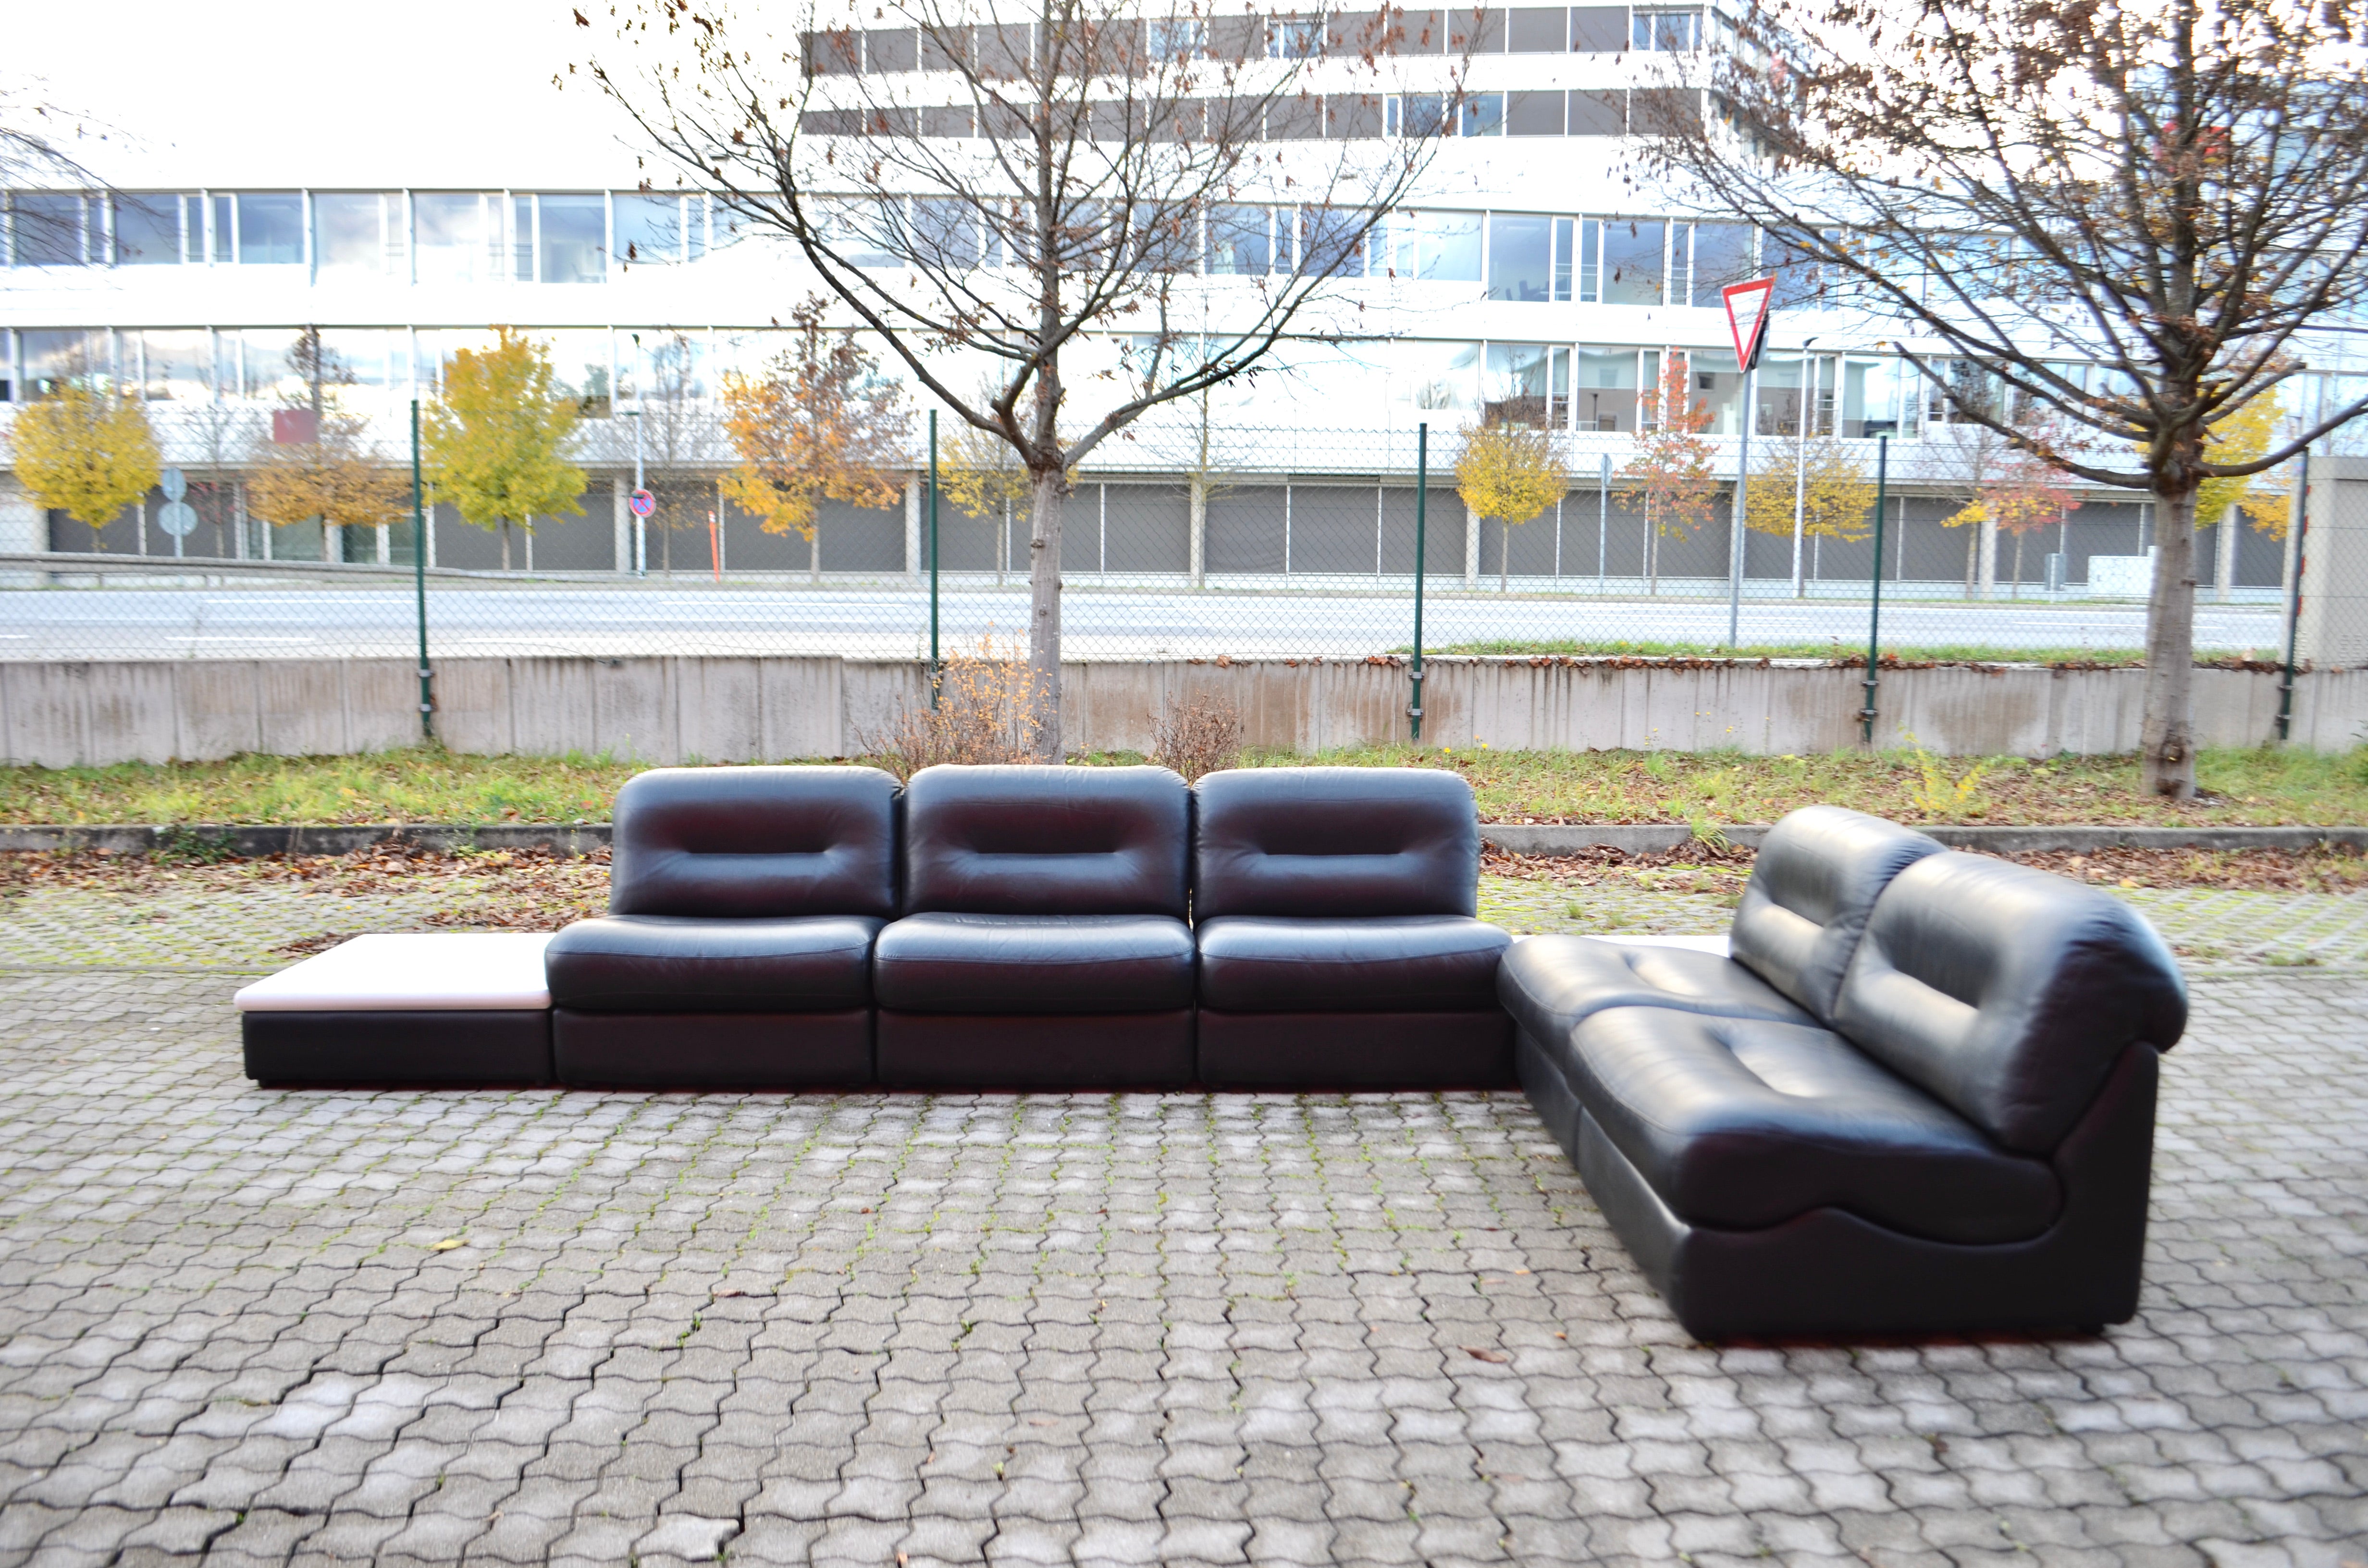 This stunning Modular sectional leather sofa was manufactured in Germany.
It is a pure 70ties design 
The frame of every element is made of wood and it is covered by foam and black leather.
The seating cushions can be removed.
This modular sofa